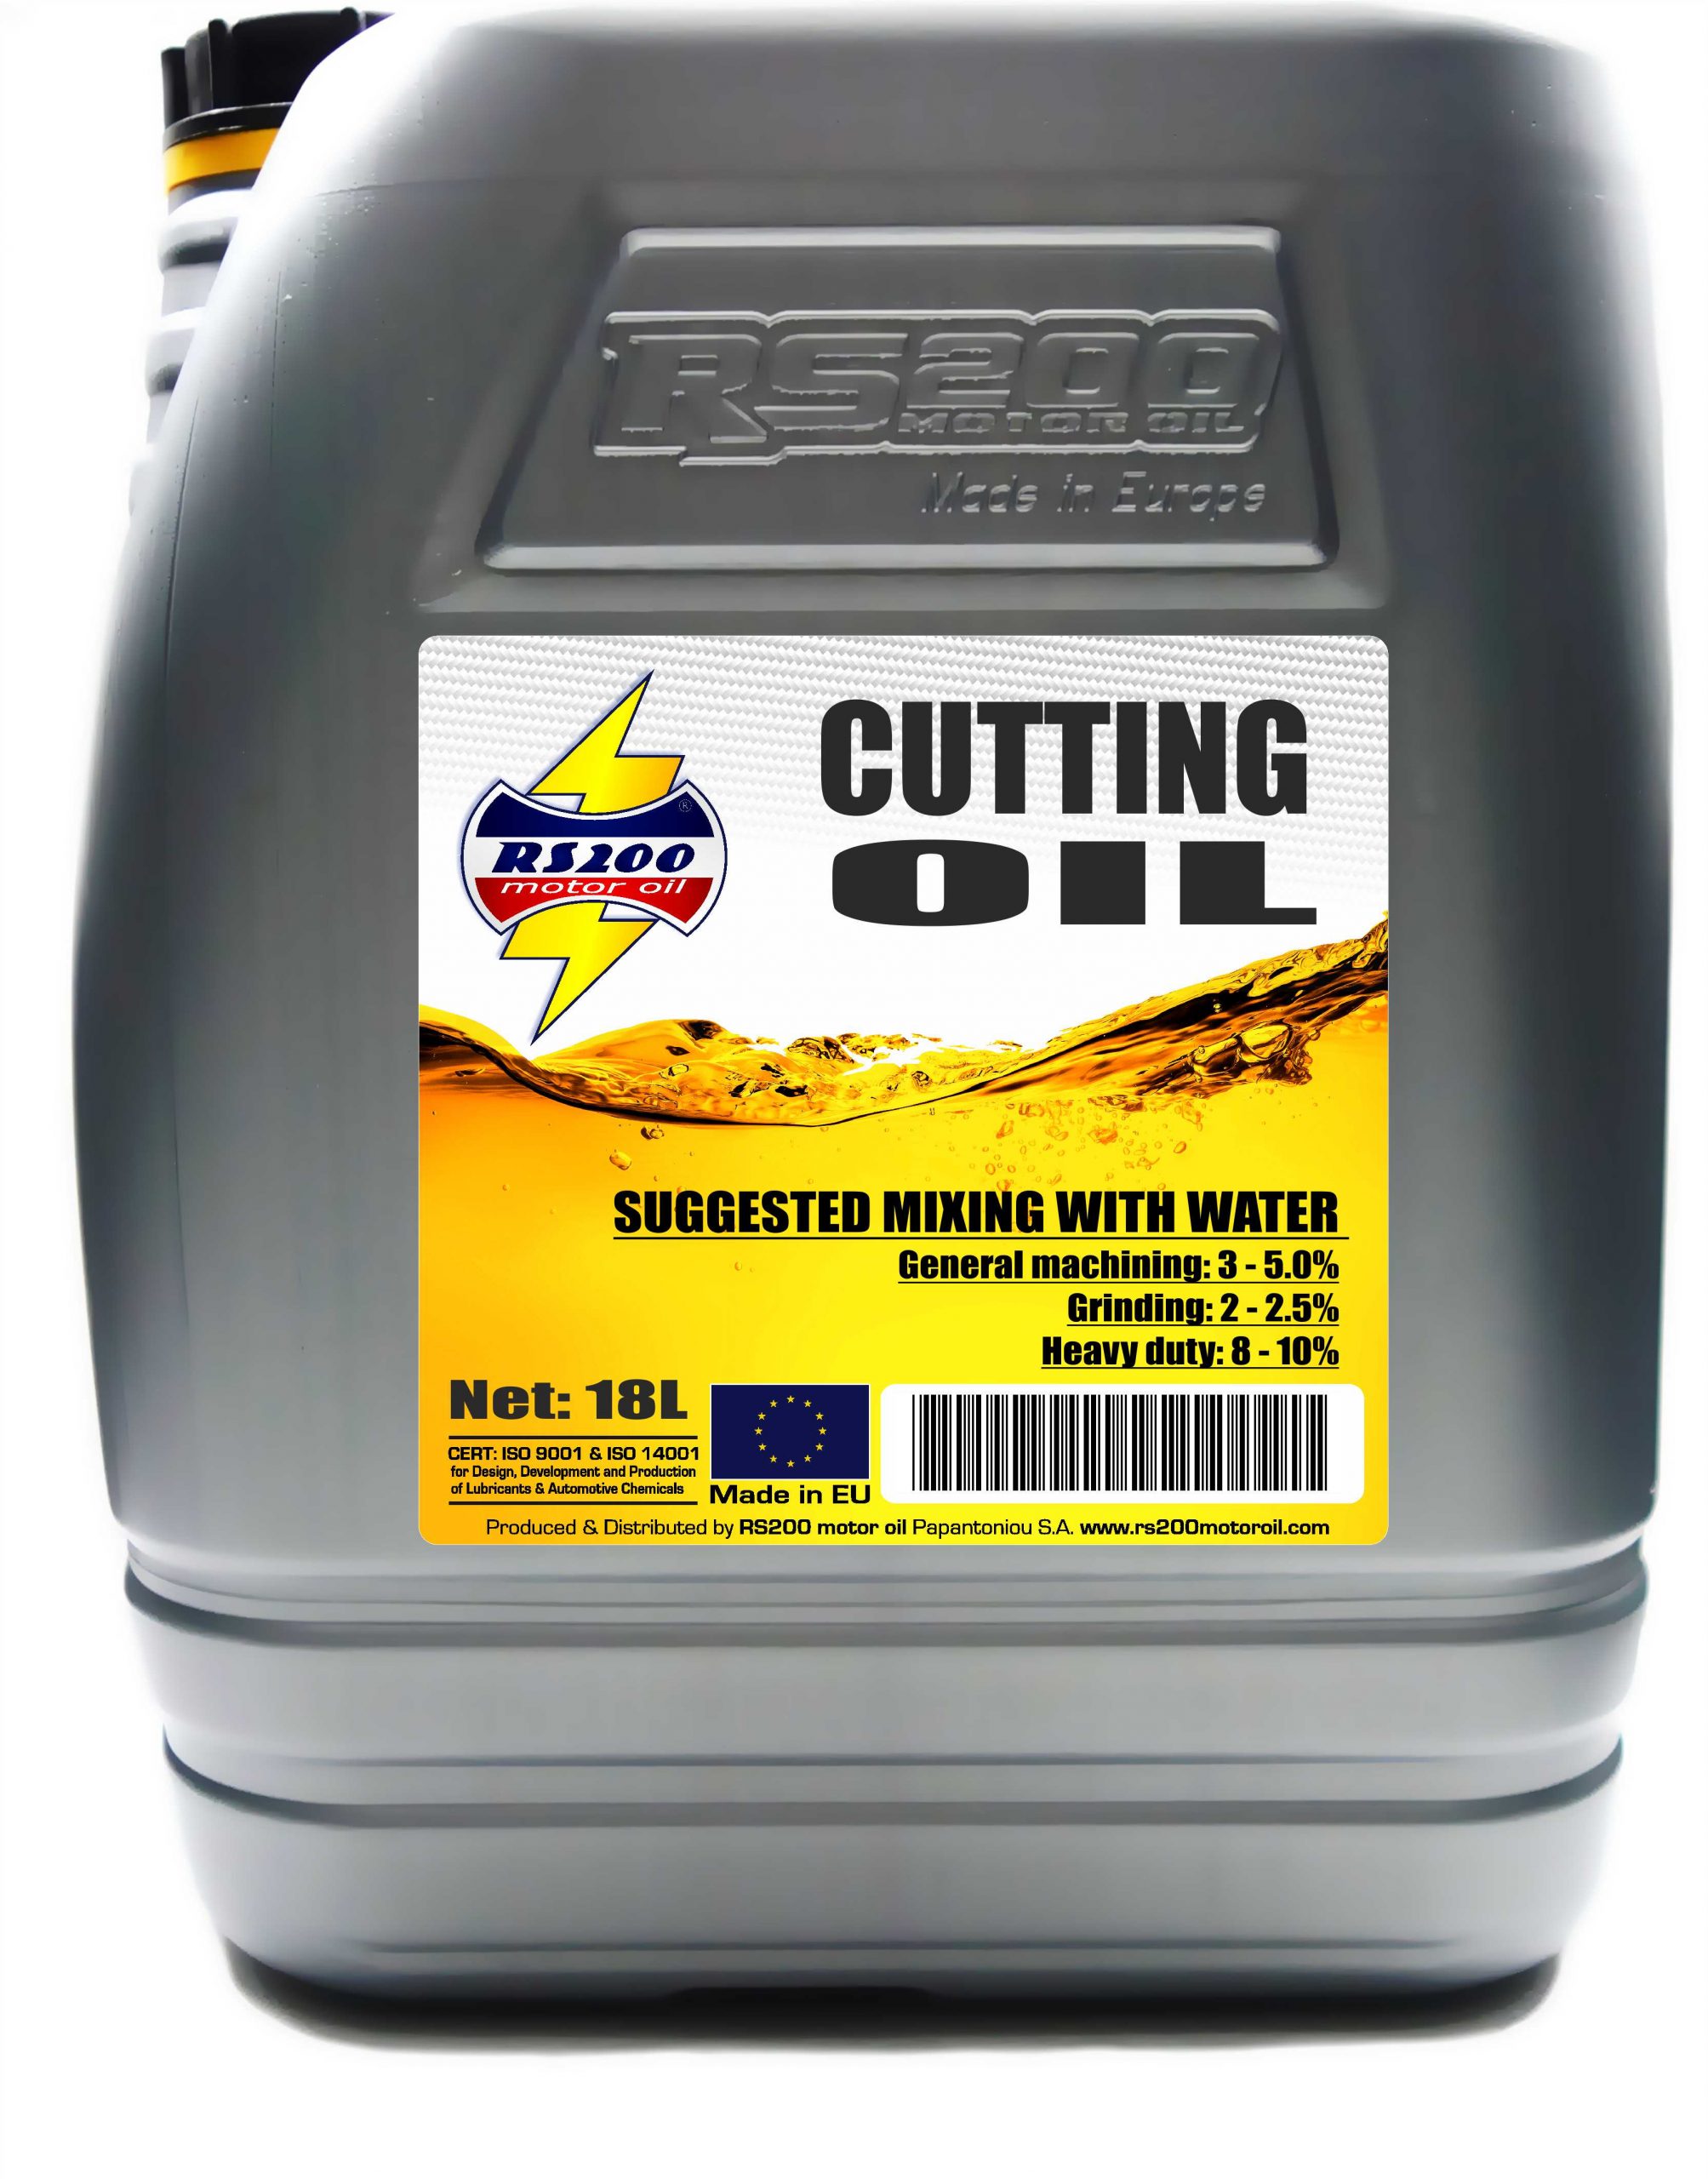 Cutting oil - RS200